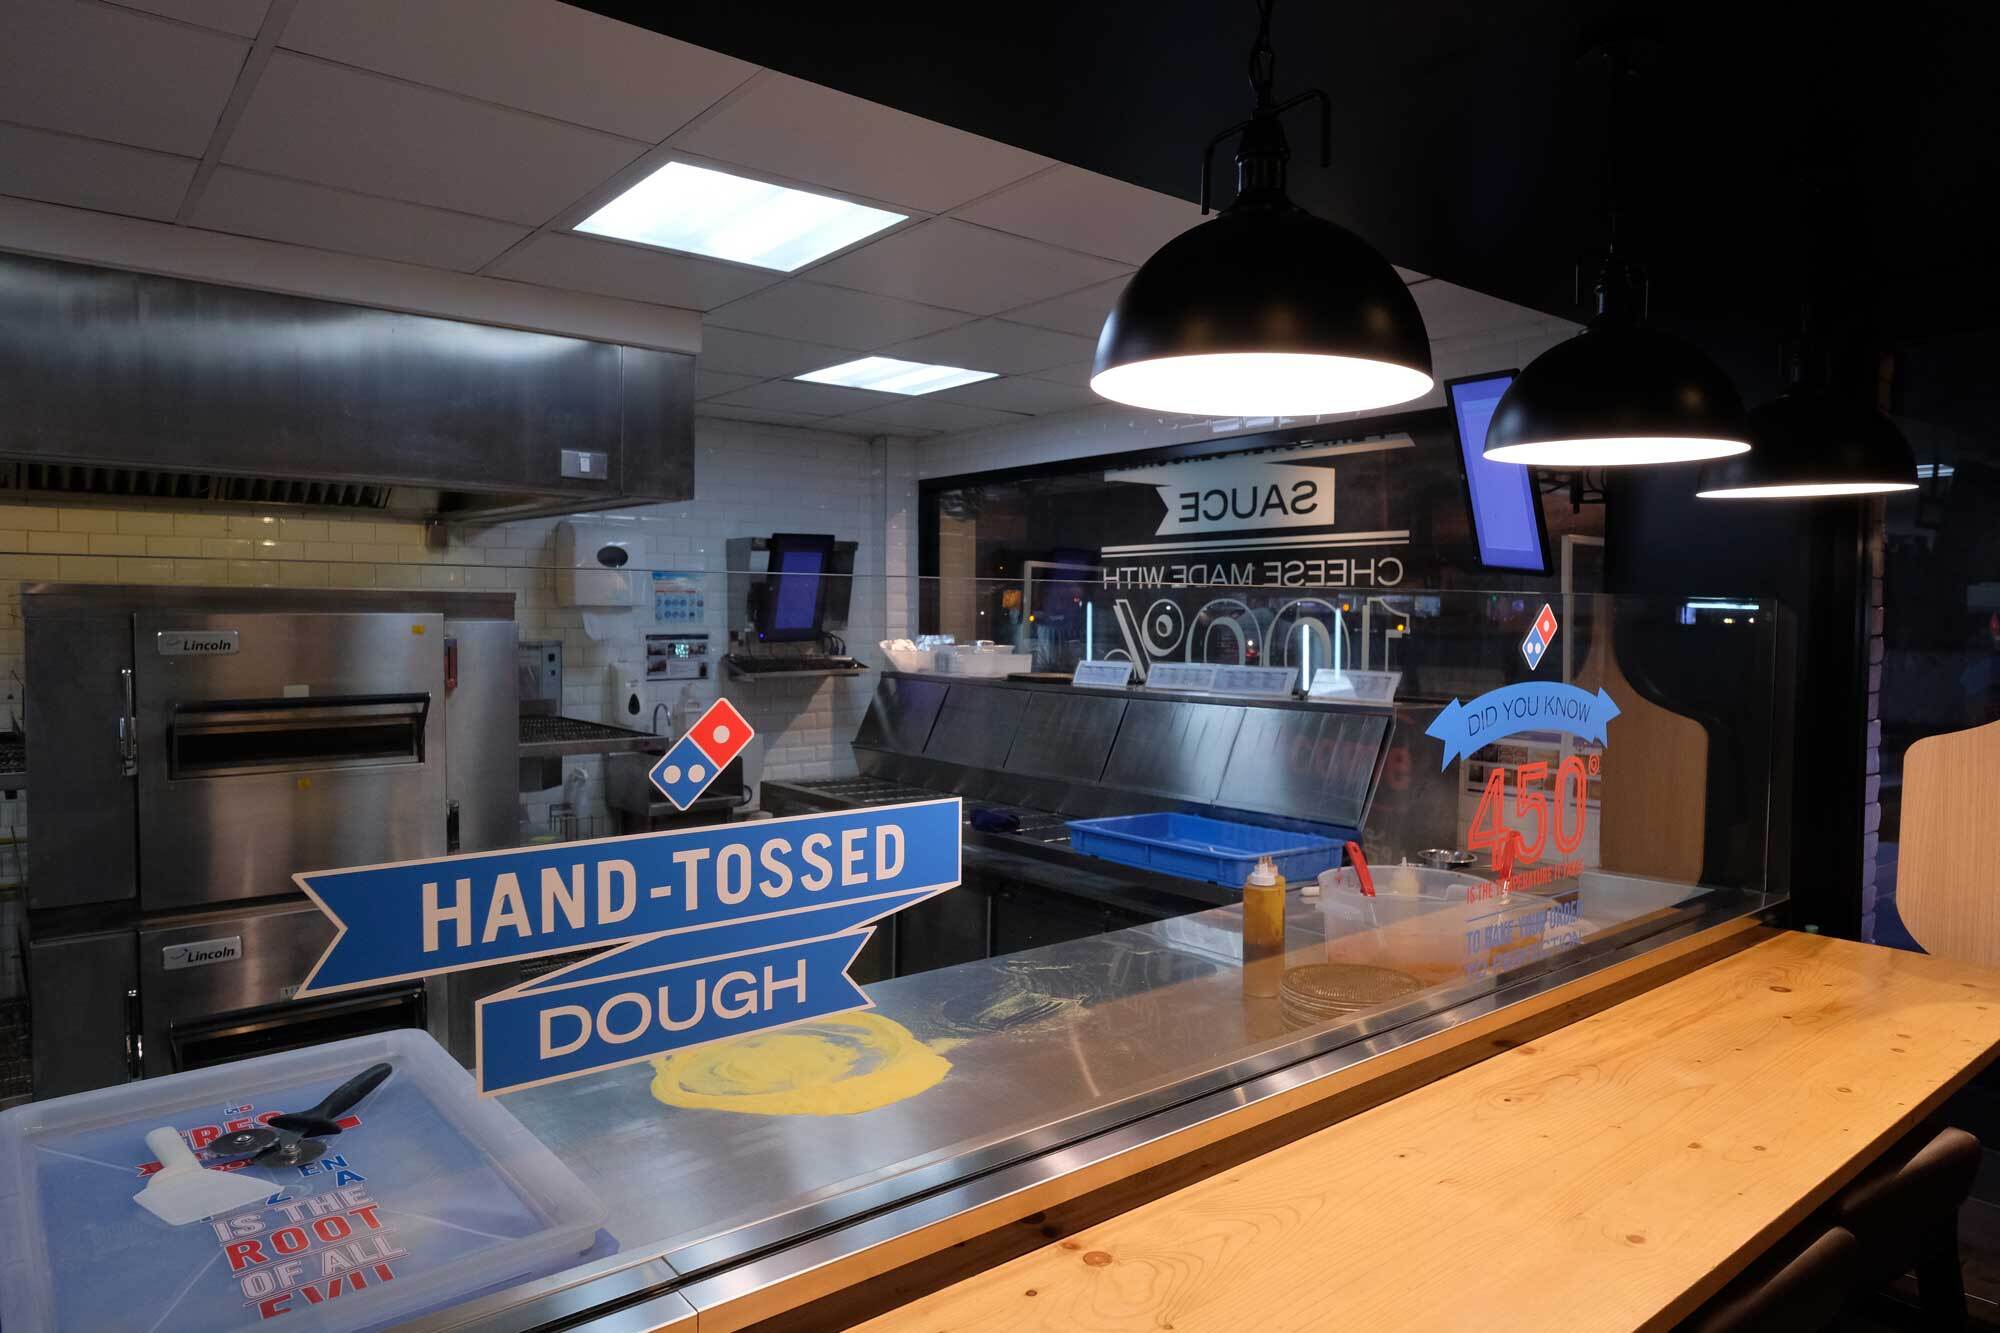 Photograph of a Domino's Pizza kitchen at night